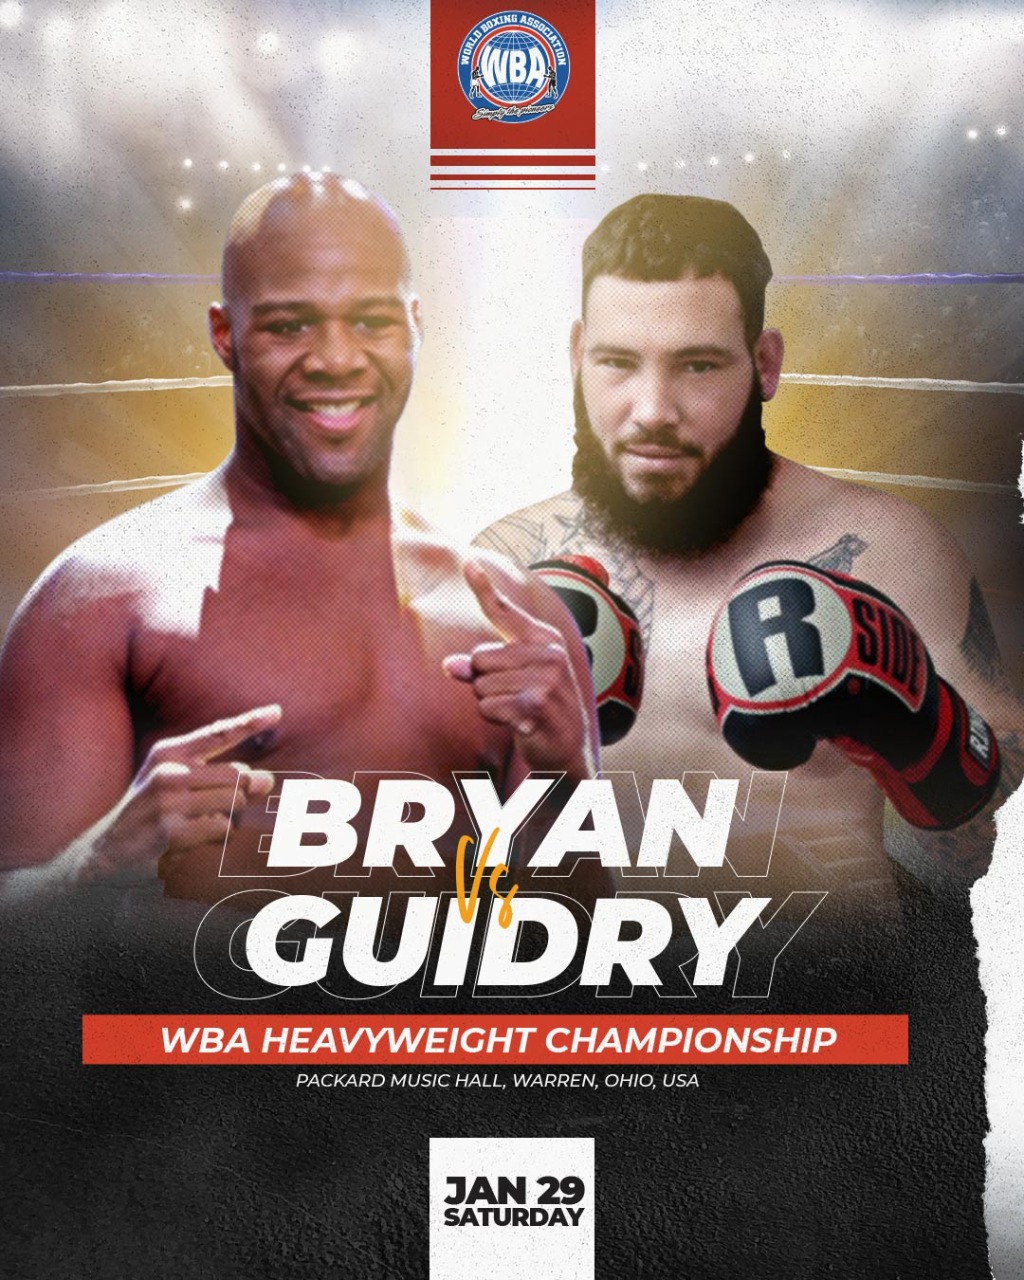 Bryan defends his WBA title against Guidry this Saturday